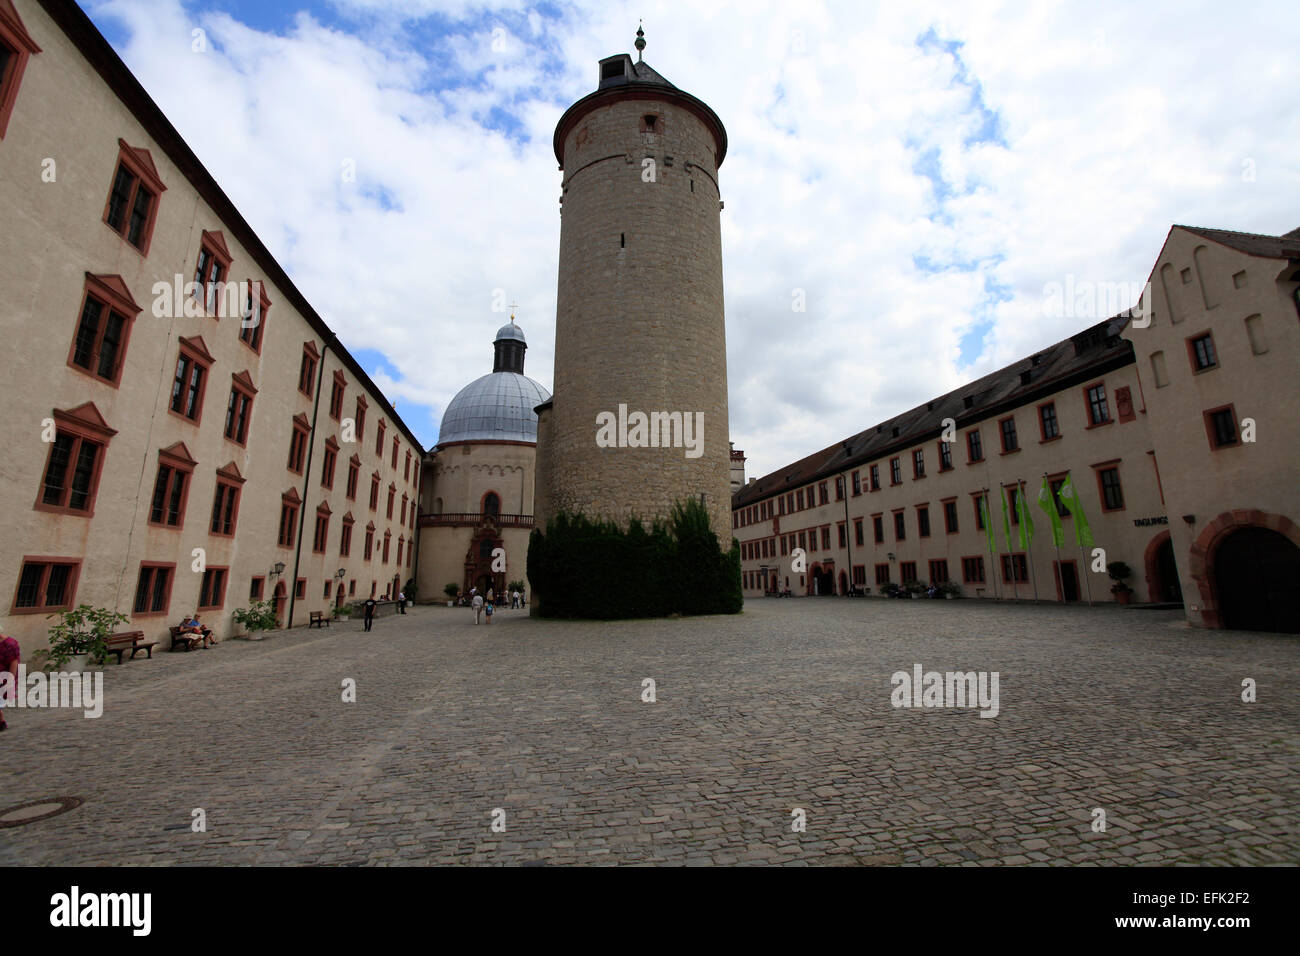 The interior courtyard of the fortress Marienberg in Wuerzburg with Bergfried and St. Mary's Church. The fortress is surrounded by vineyards and overlooks the ancient university city with its domes, towers and bridges. Photo: Klaus Nowottnick Date: August Stock Photo